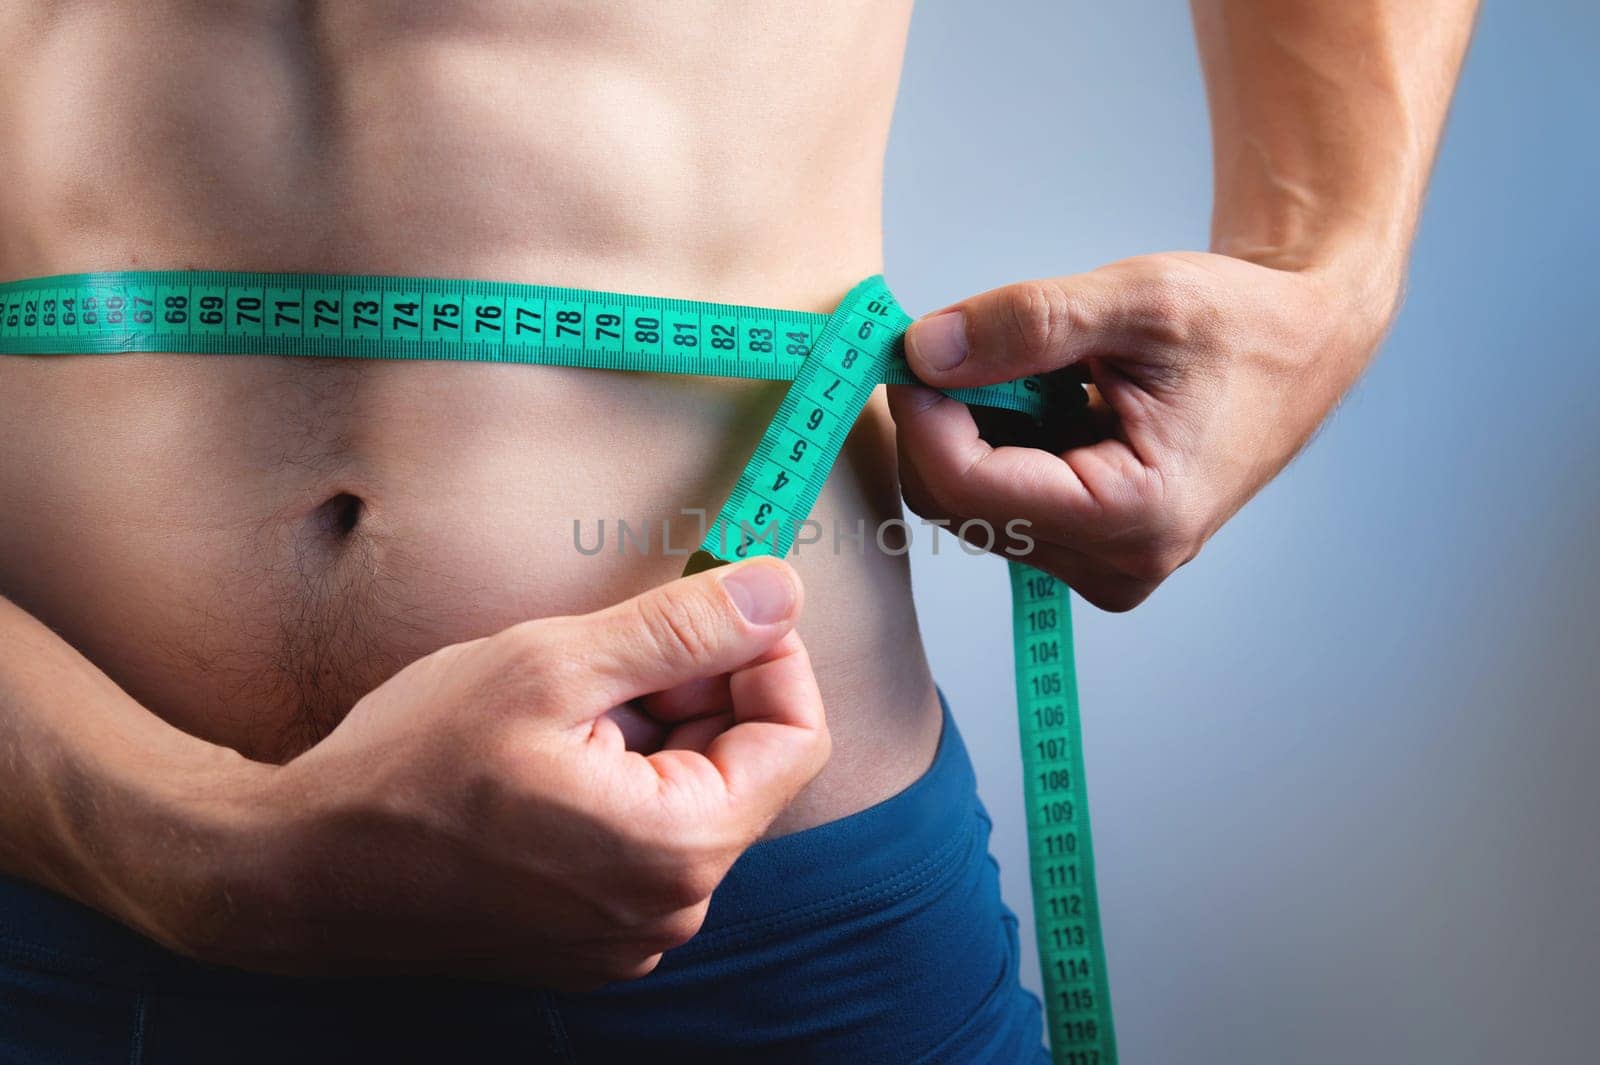 muscular athlete poses shirtless and measures his waistline with a measuring tape. Close-up of an athlete measuring his body volume and the result of diet and training by yanik88